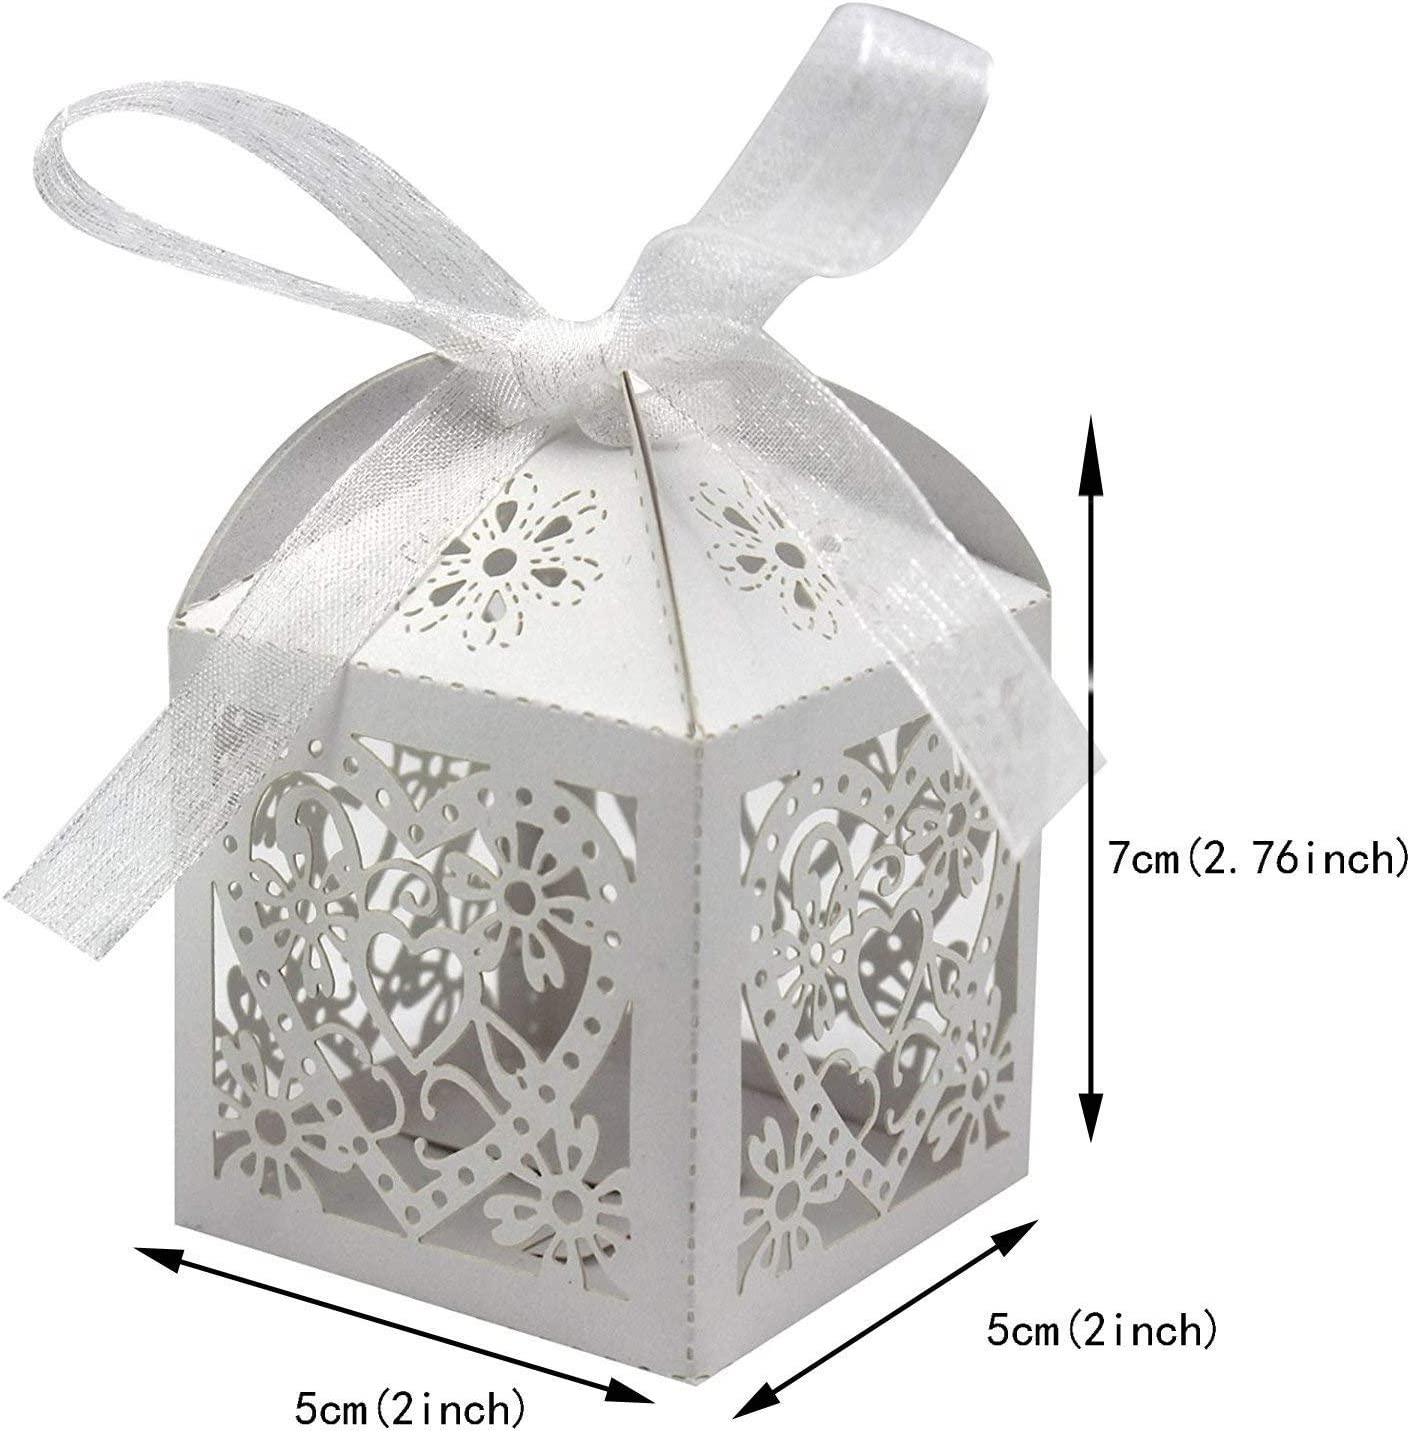 100pcs Love Heart Laser Cut Wedding Party Favor Box Candy Bag Chocolate Gift Boxes - If you say i do